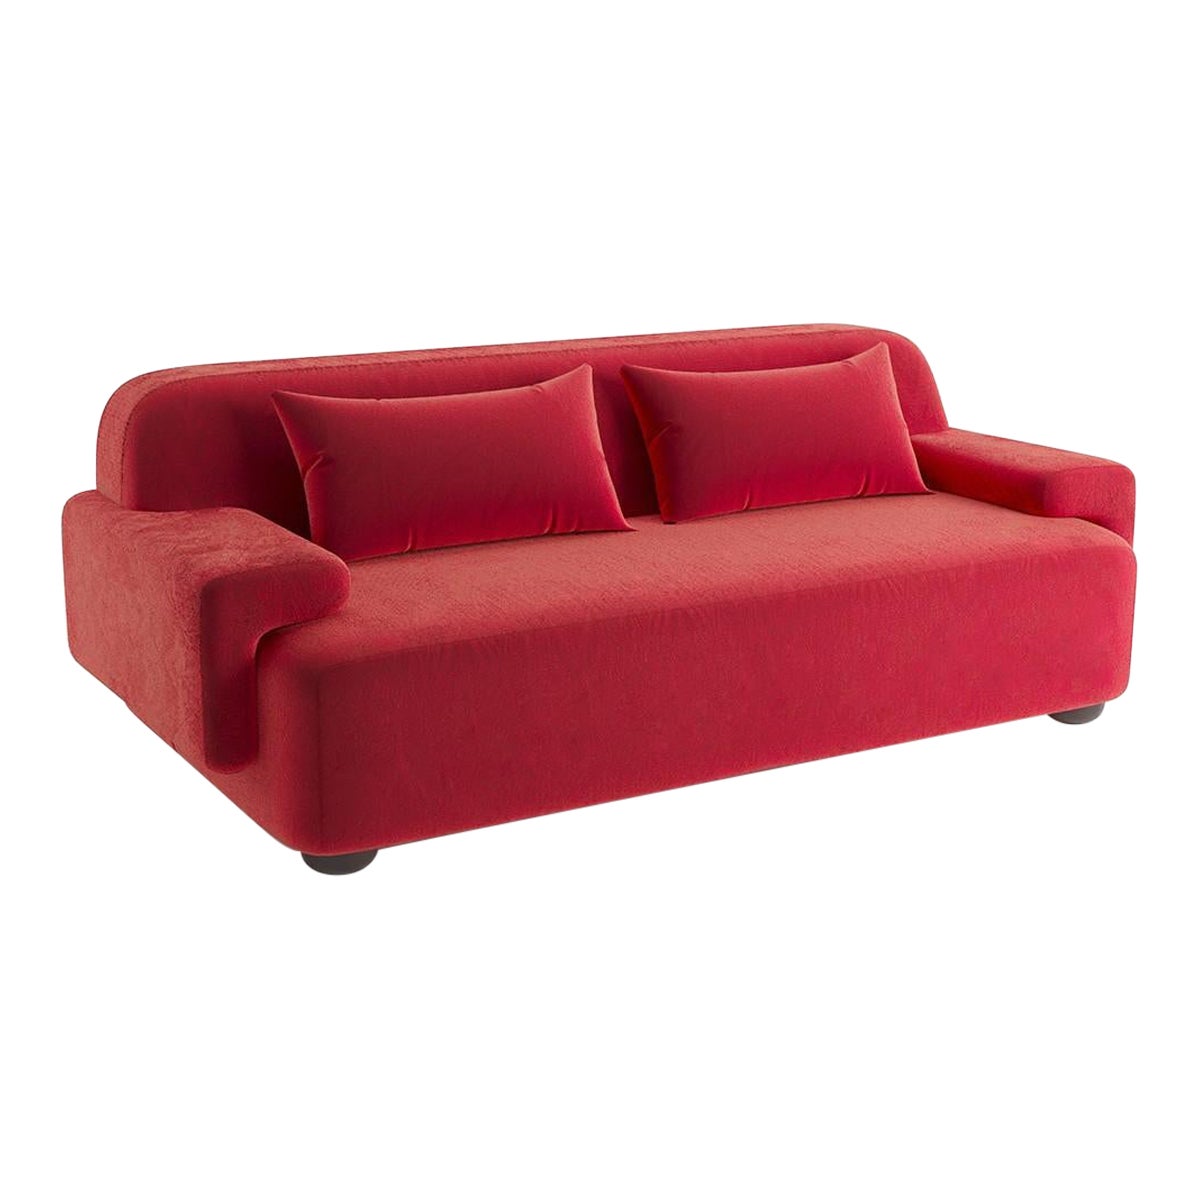 Popus Editions Lena 2.5 Seater Sofa in Red Verone Velvet Upholstery For Sale